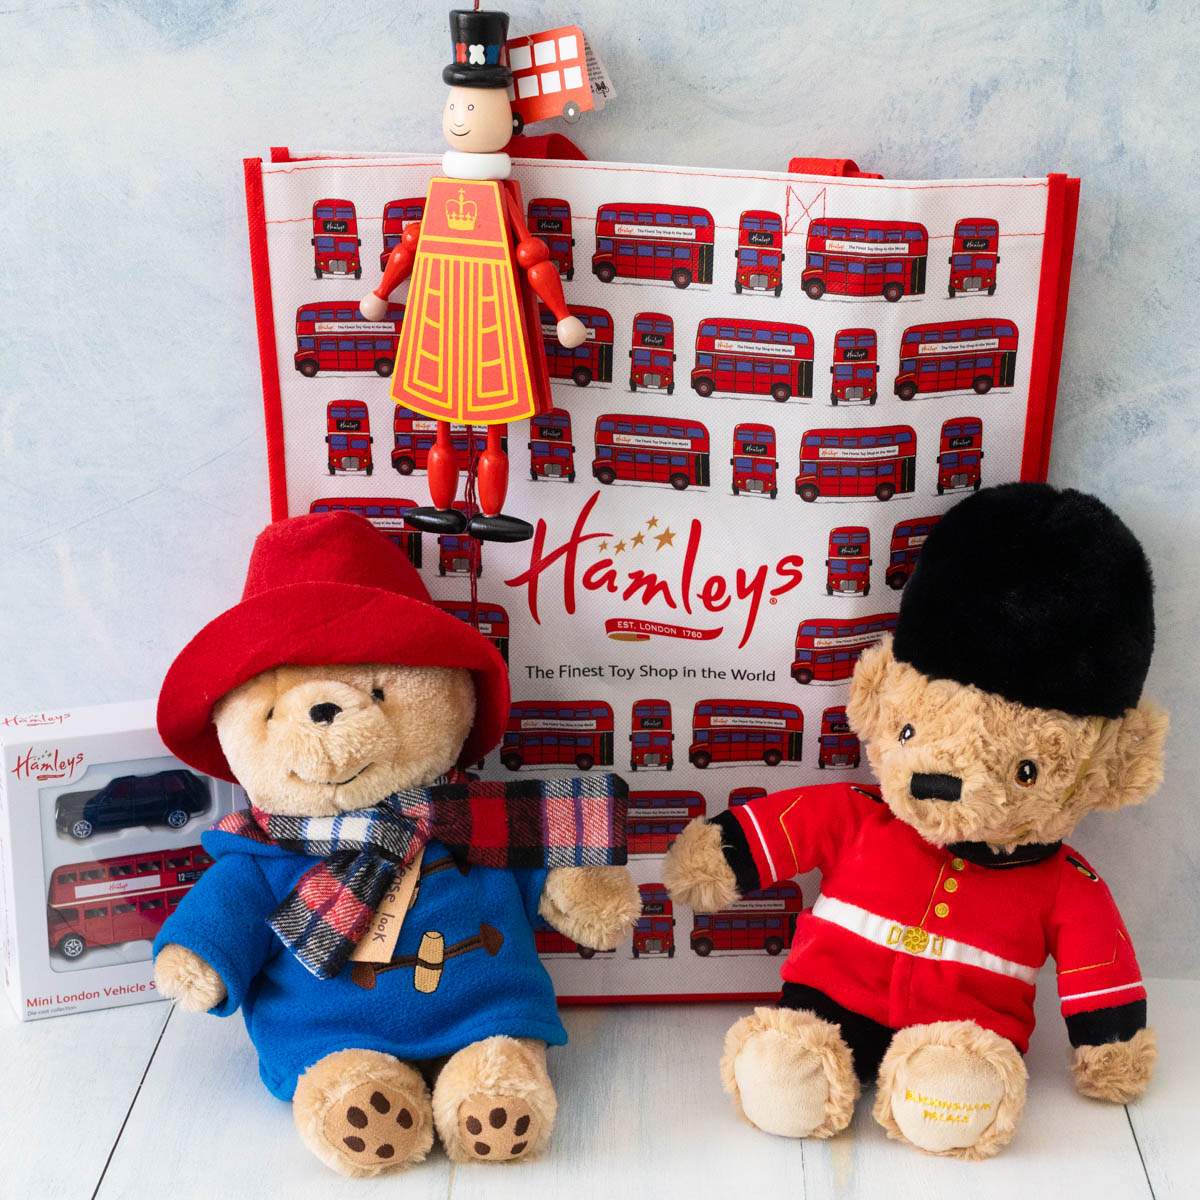 Two stuffed bears, a set of toy cars, a London shopping bag, and a pull toy.